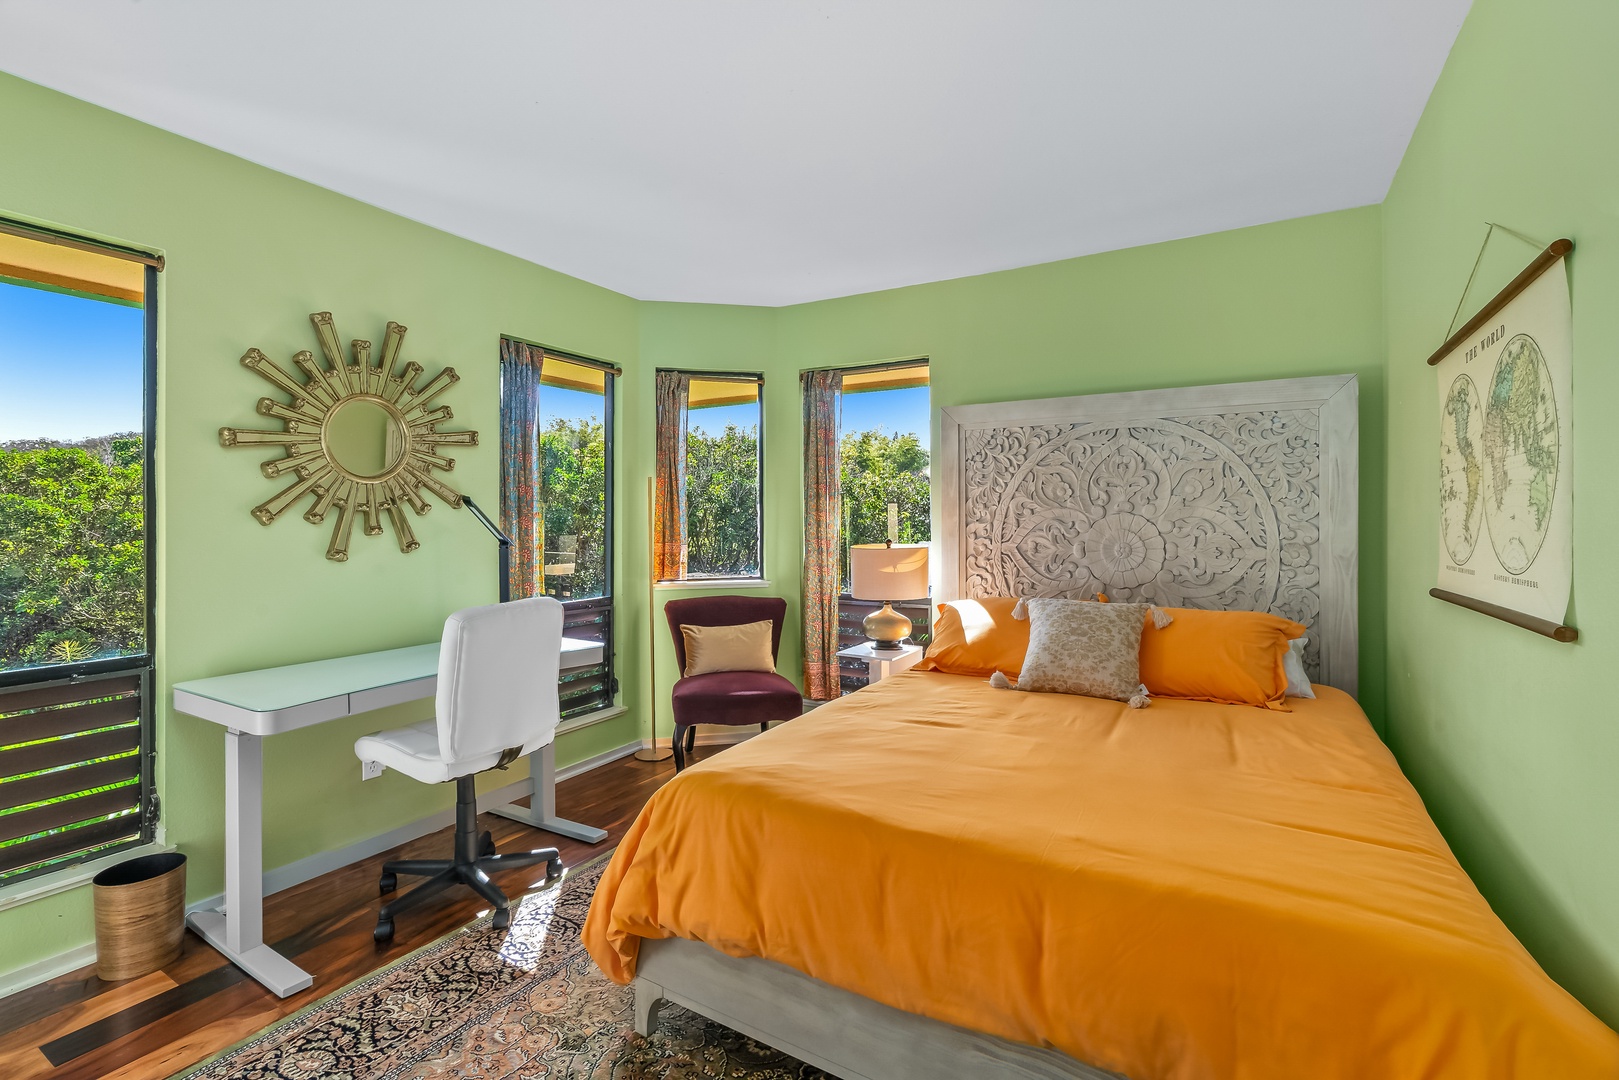 Princeville Vacation Rentals, Makanalani - Guest bedroom with outdoor views and a dedicated work space